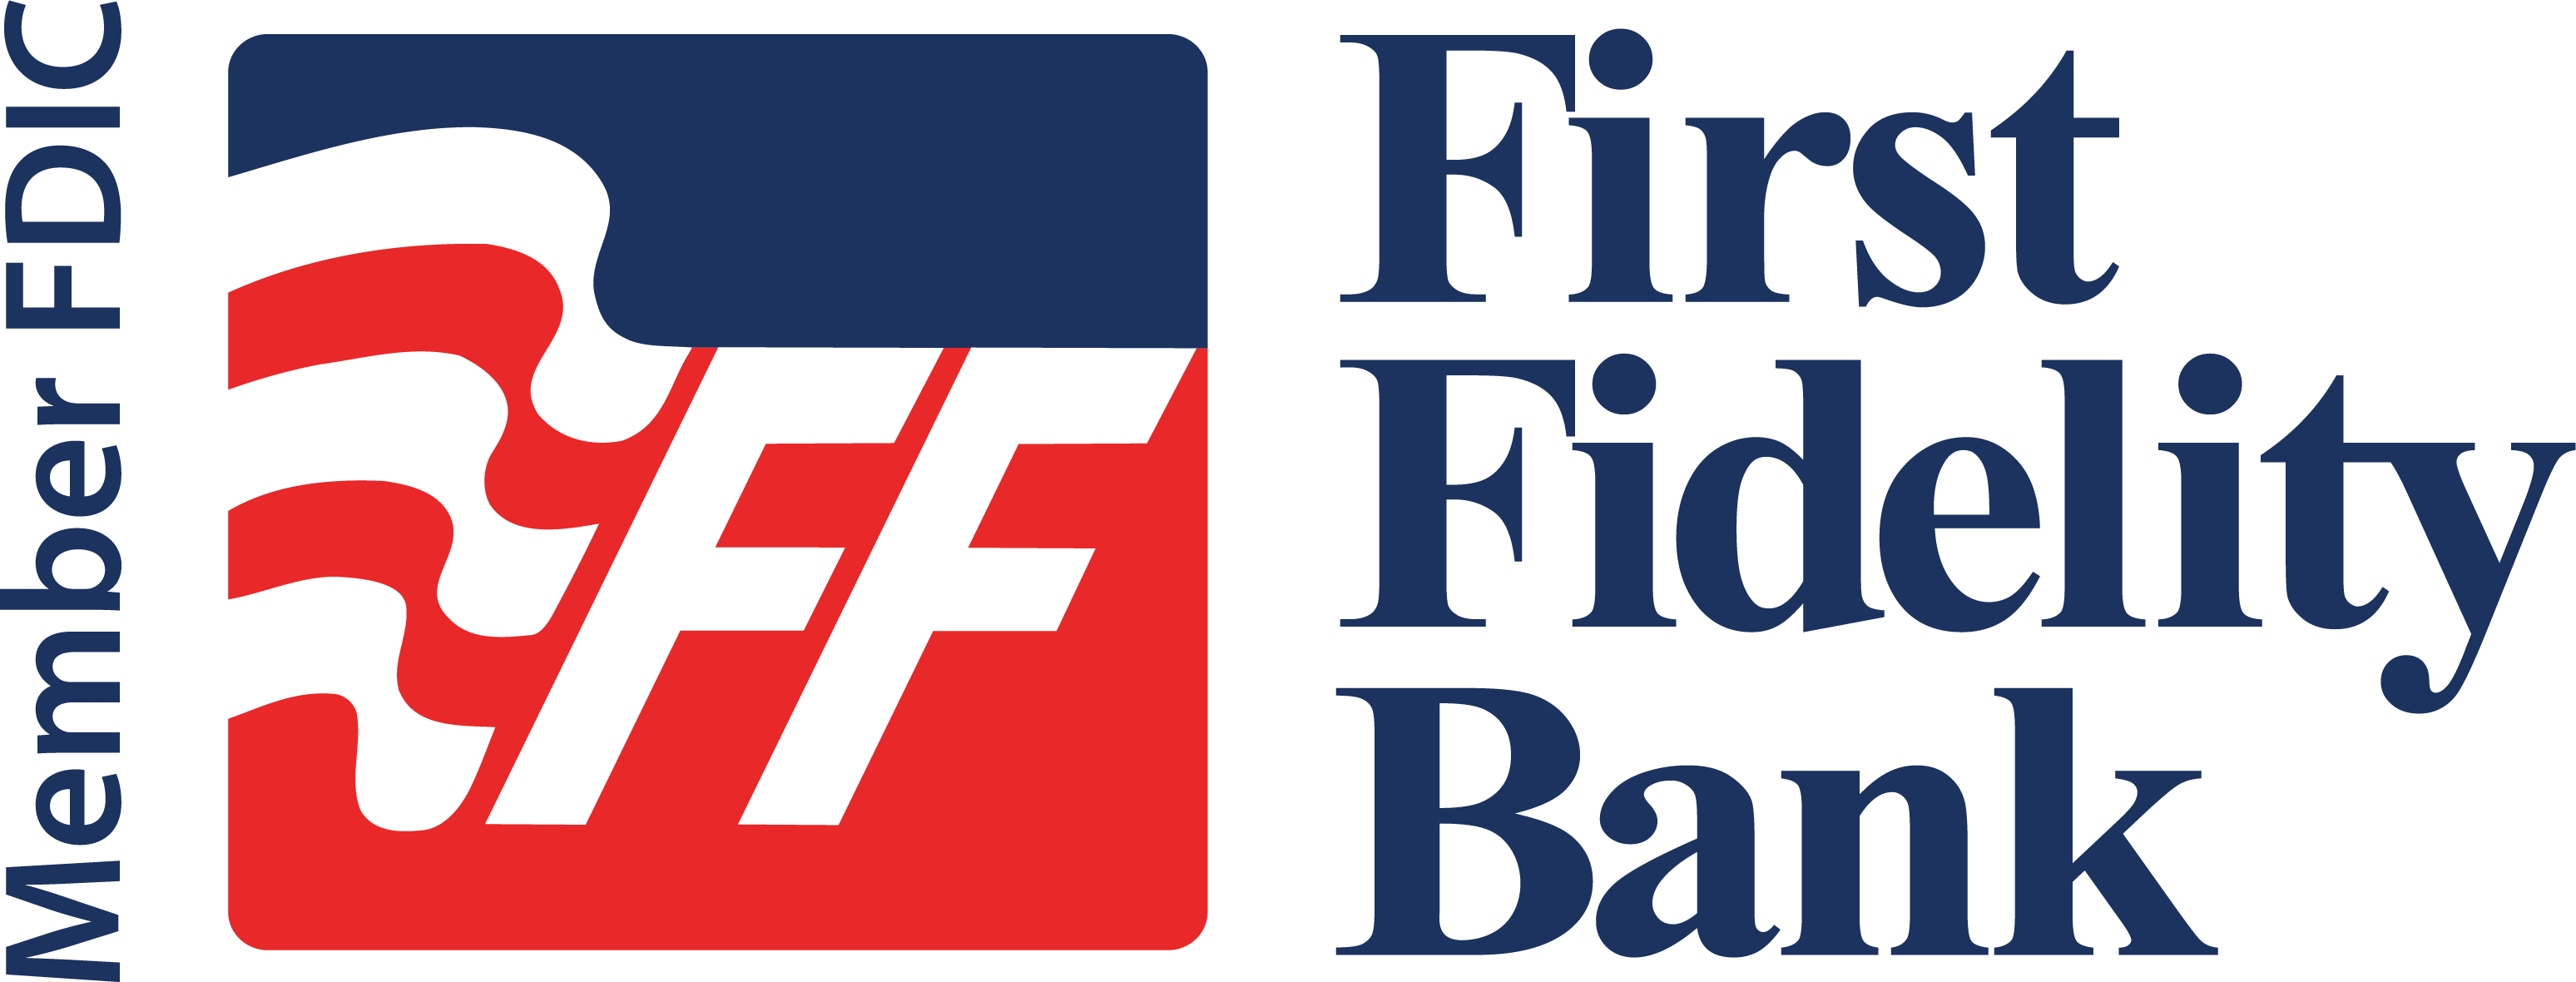 First Fidelity Bank